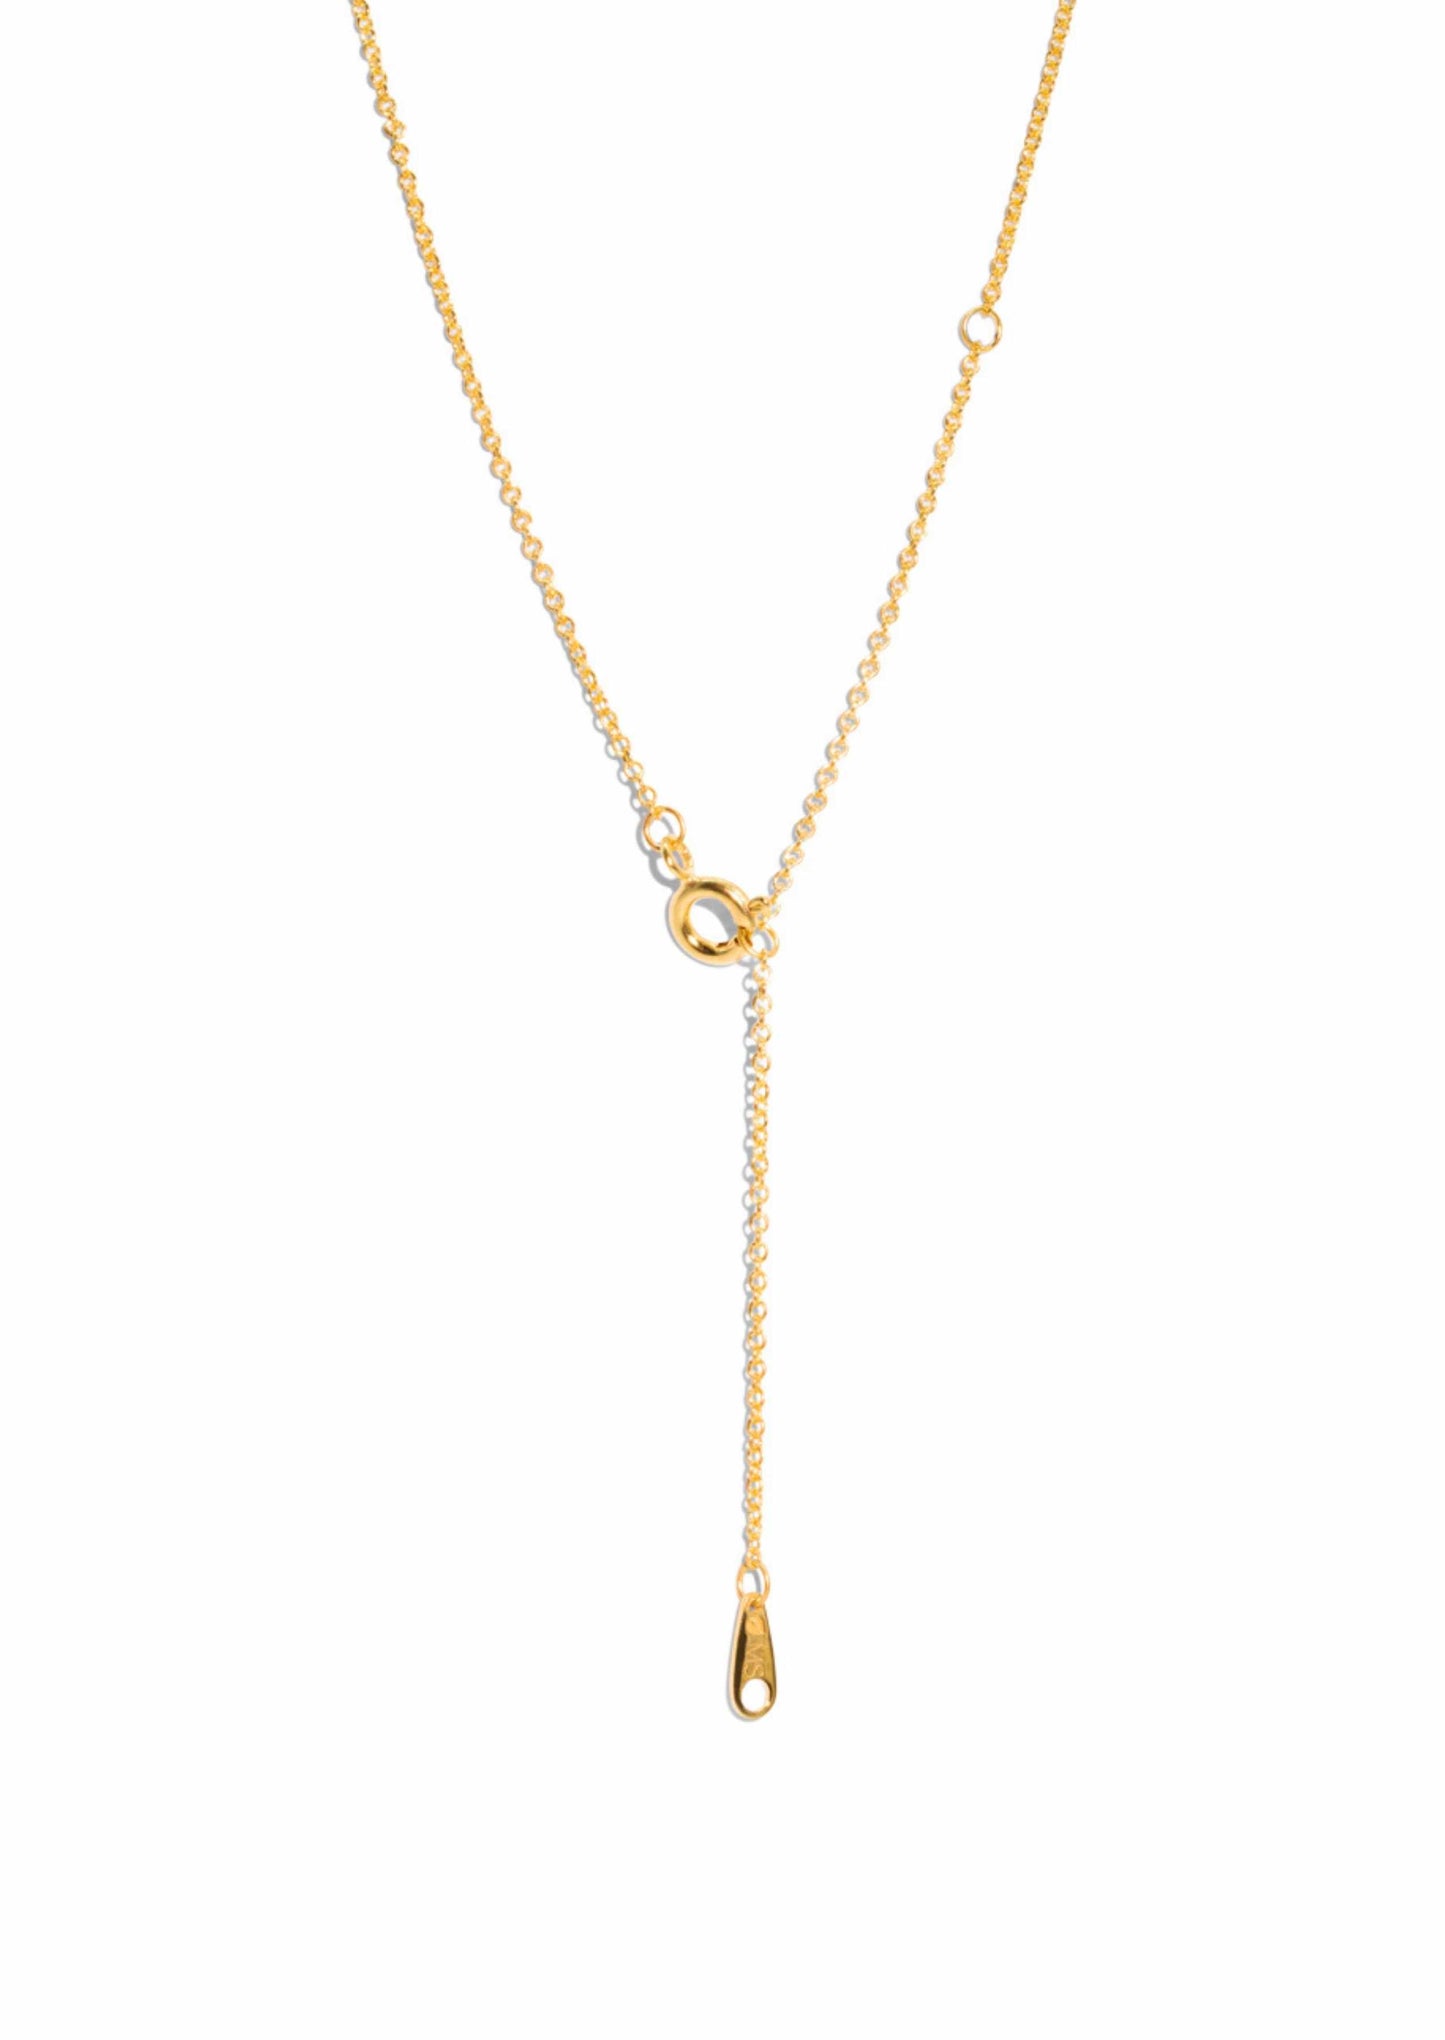 The Gold Taurus Zodiac Necklace